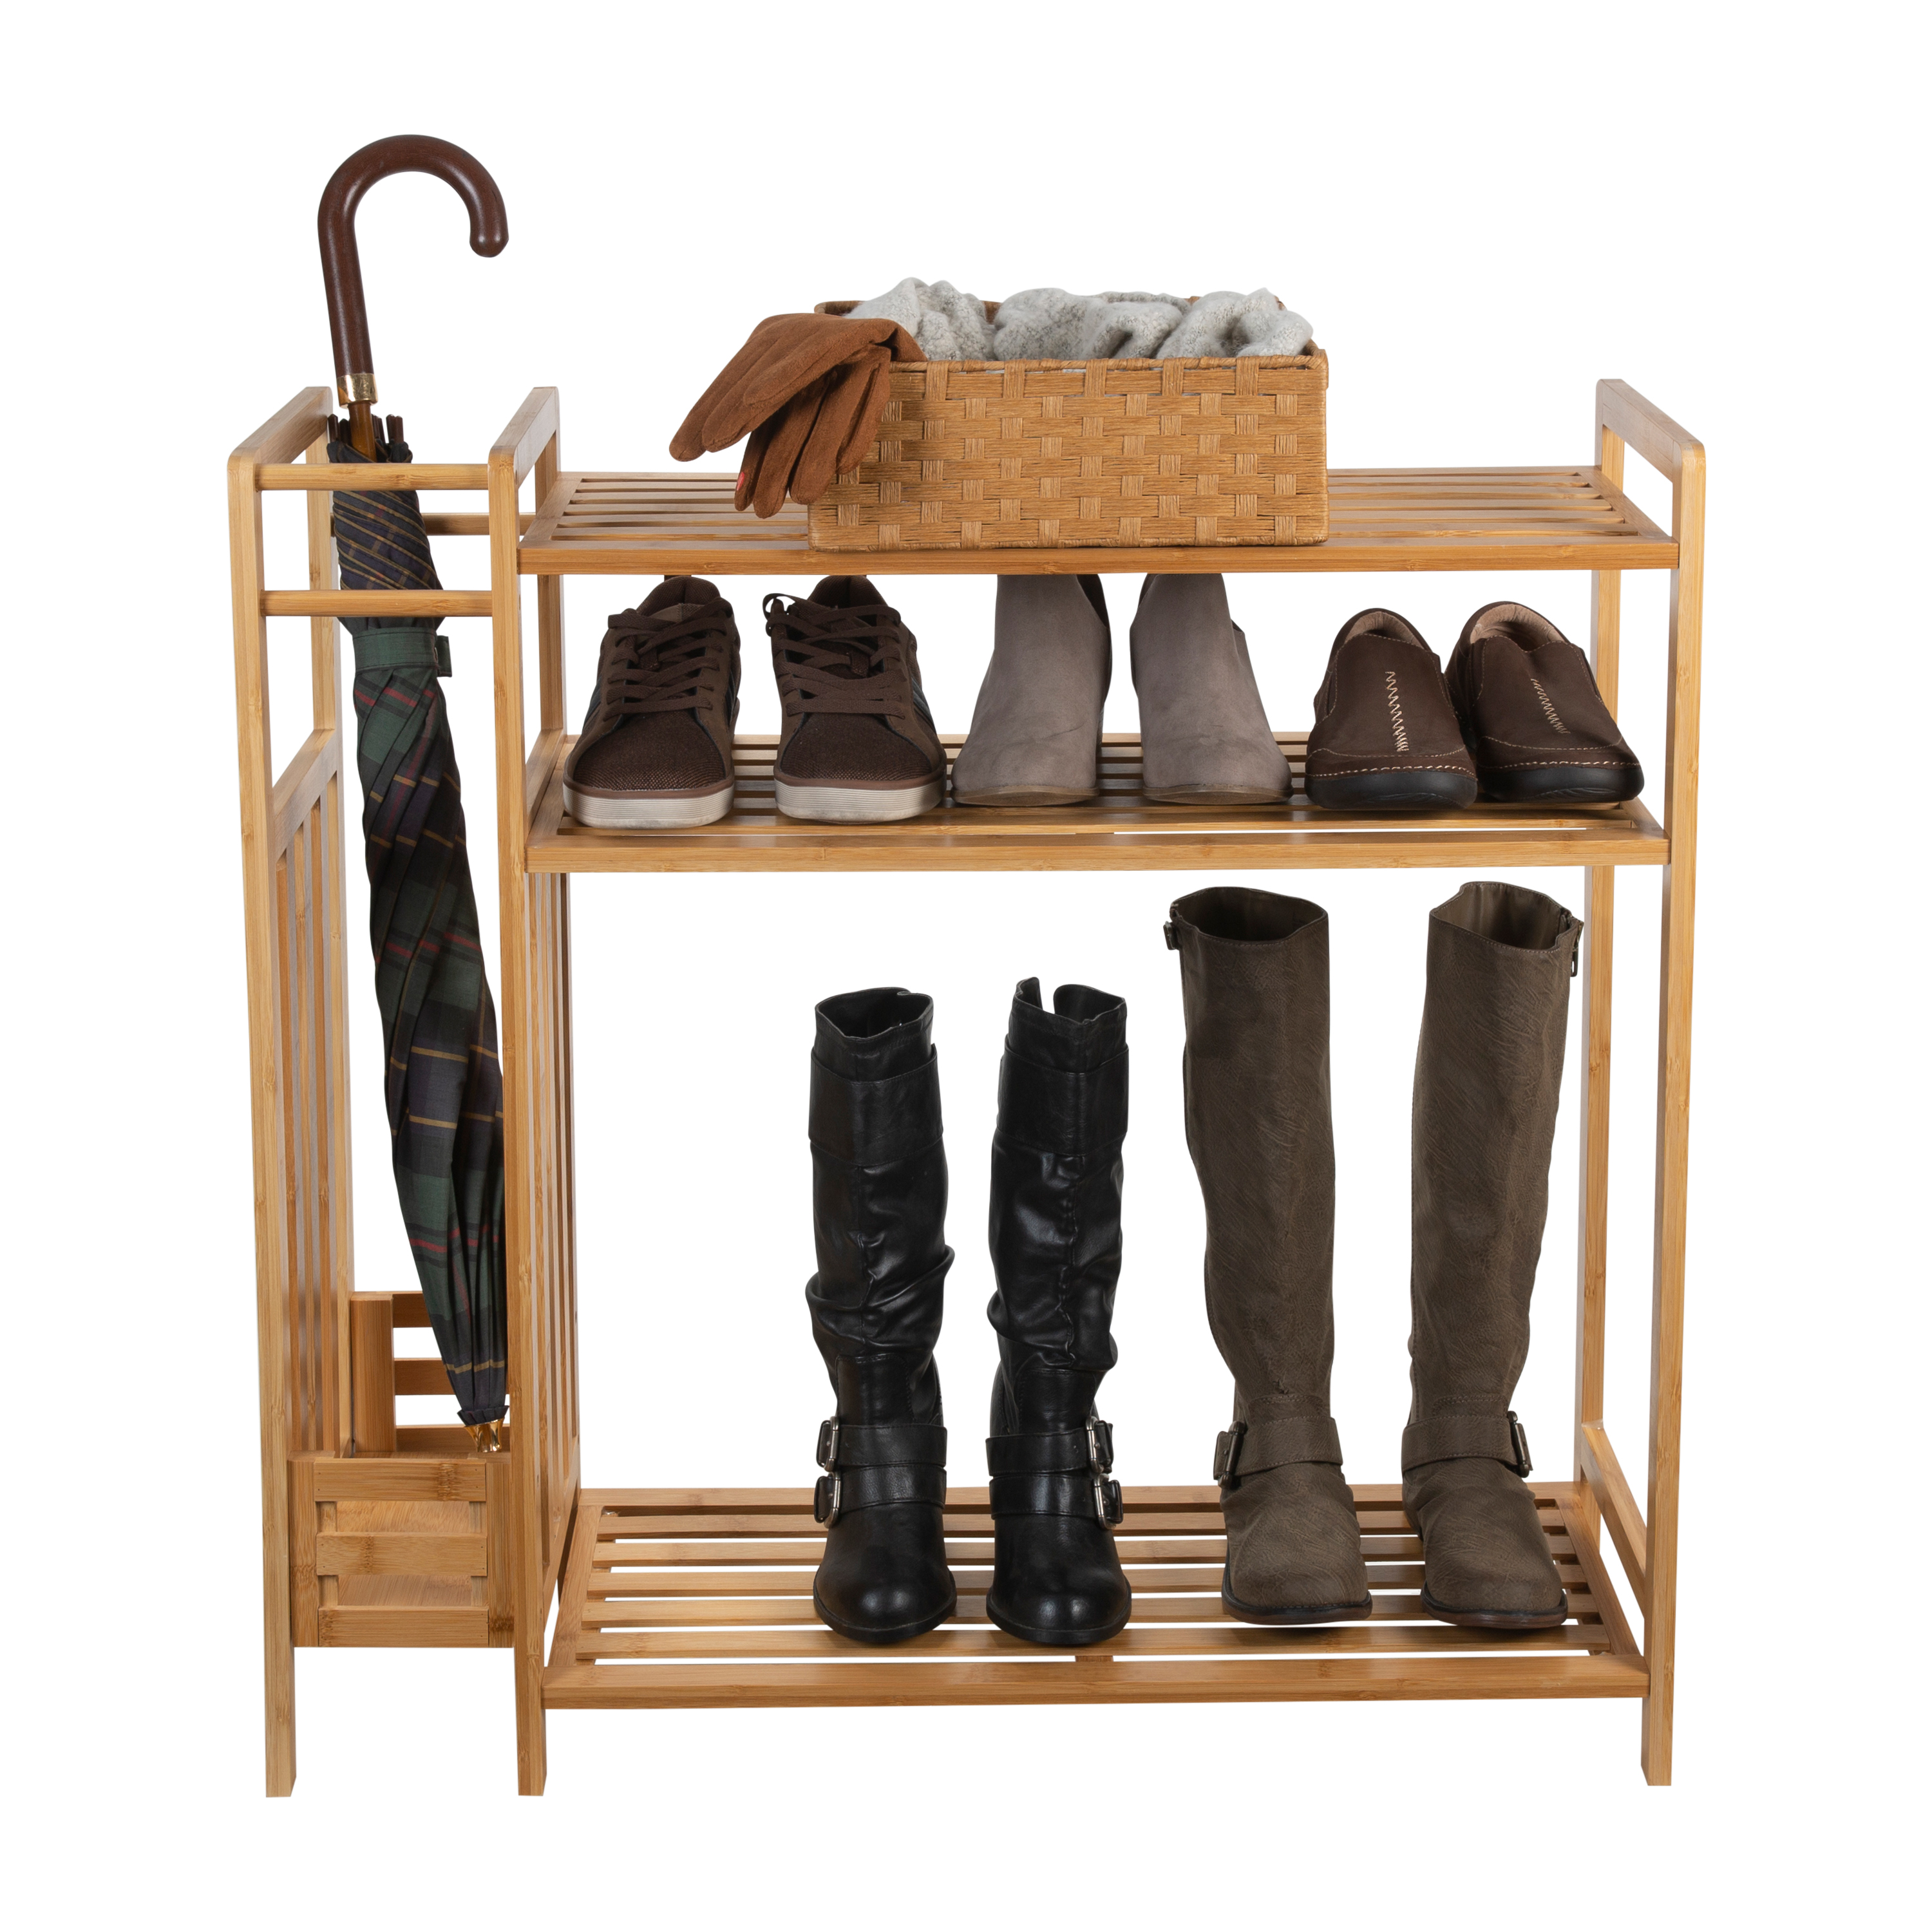 Organize It All Bamboo Shoe Rack with Umbrella Stand - image 3 of 10